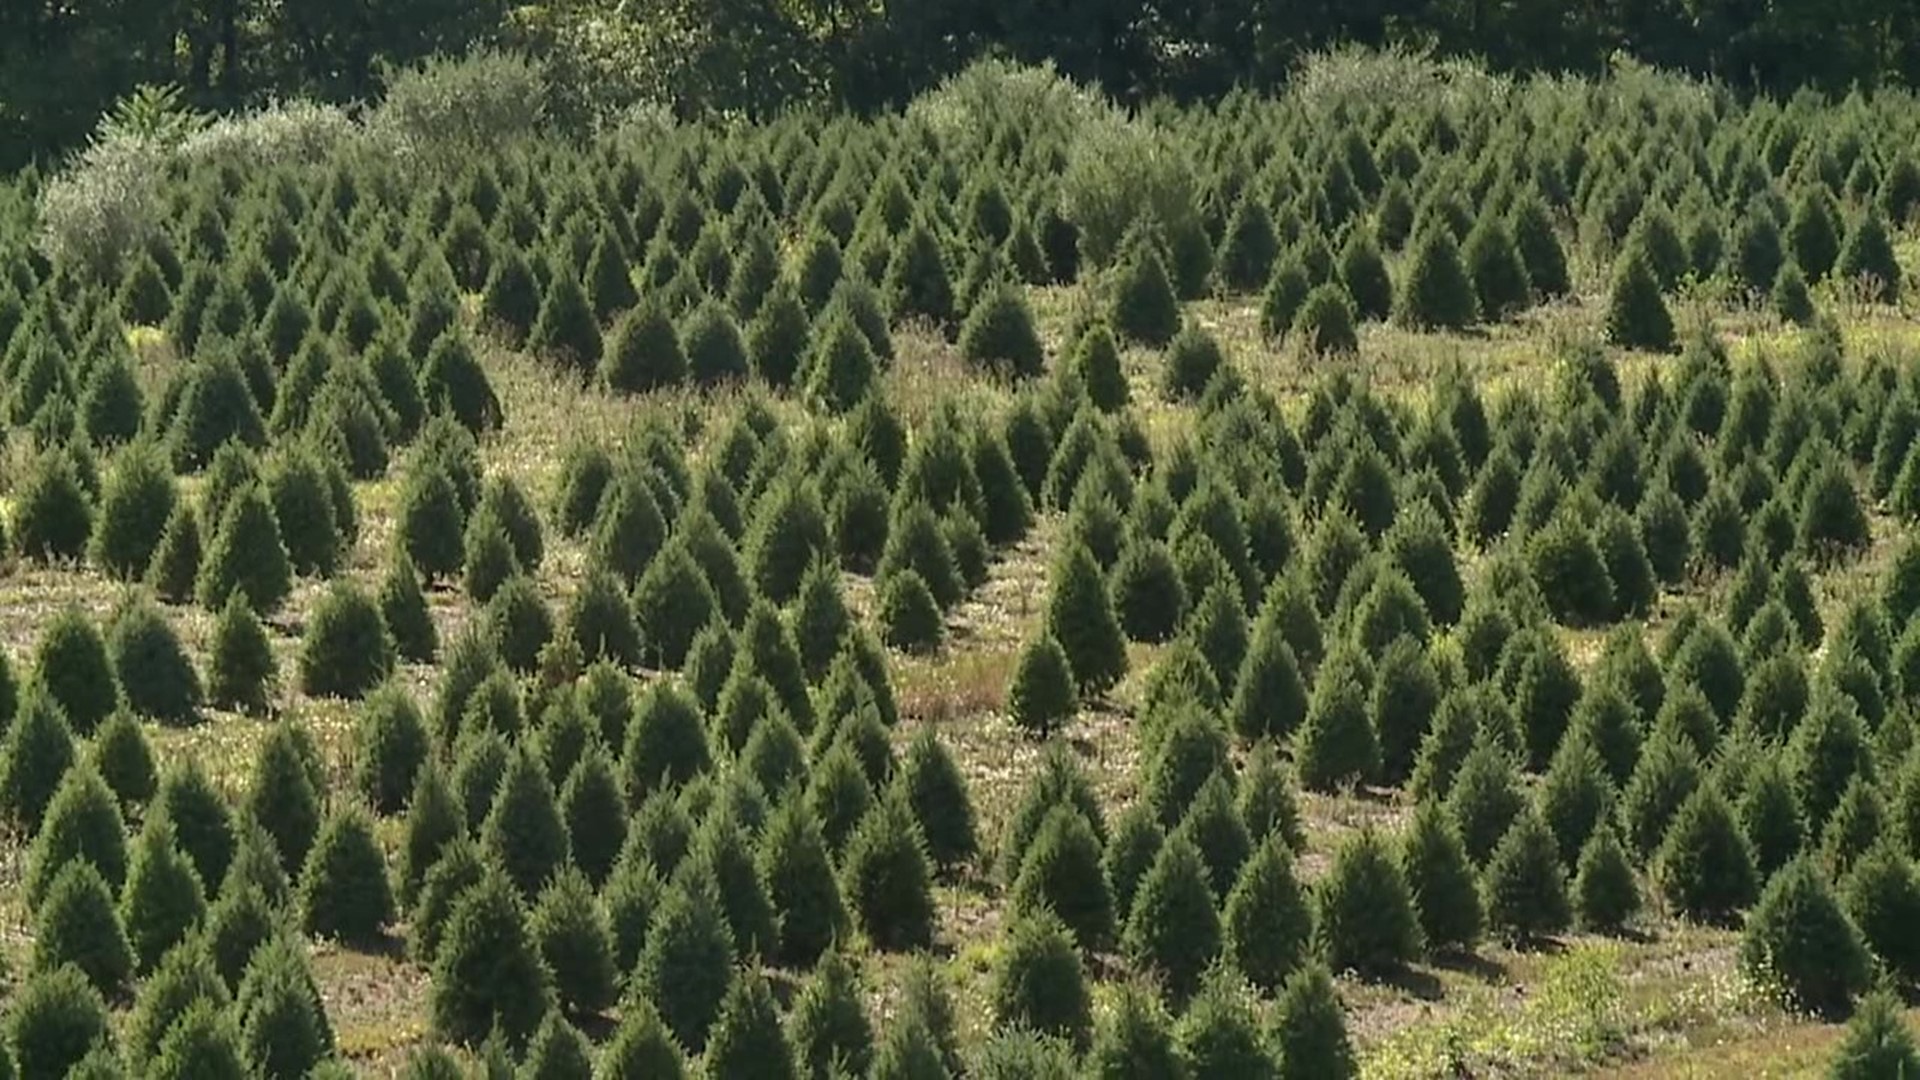 Christmas Trees in Lycoming County are experiencing little to no growth because of the lack of rain in the area.